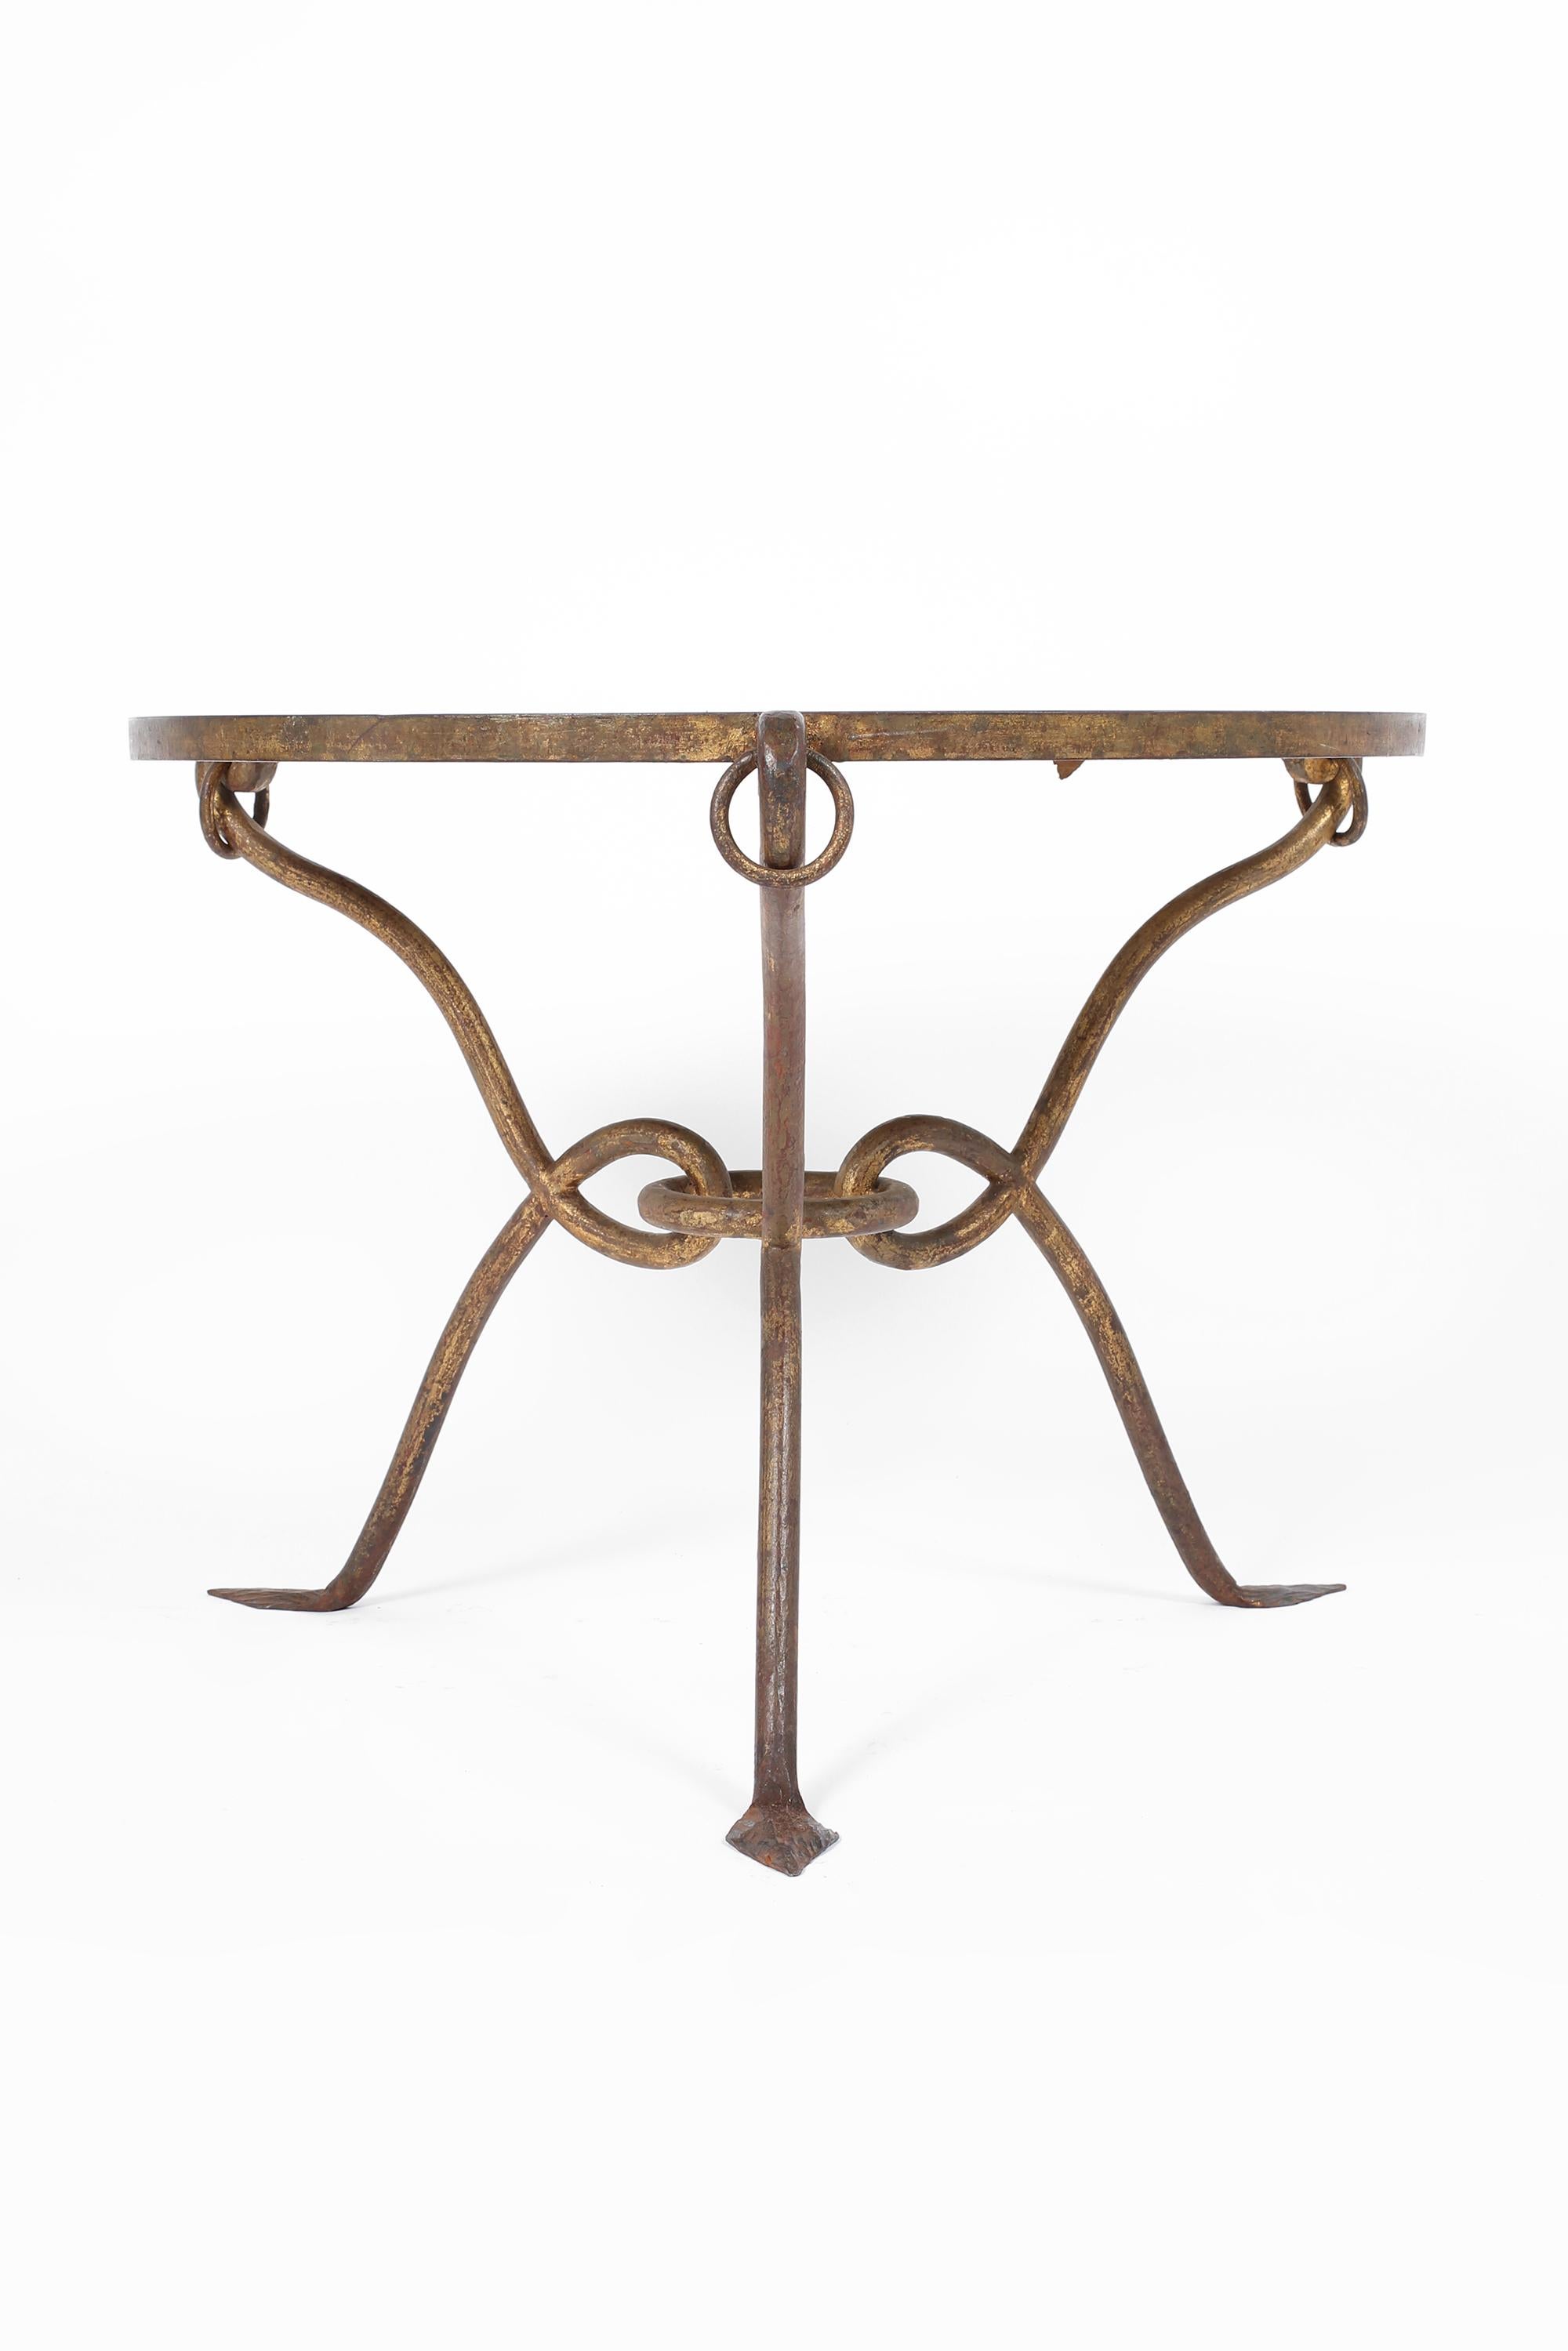 A circular side/occasional table by René Prou (1887-1947), with a gilt forged iron frame and original foliate églomisé mirror glass top. French, c. 1940.